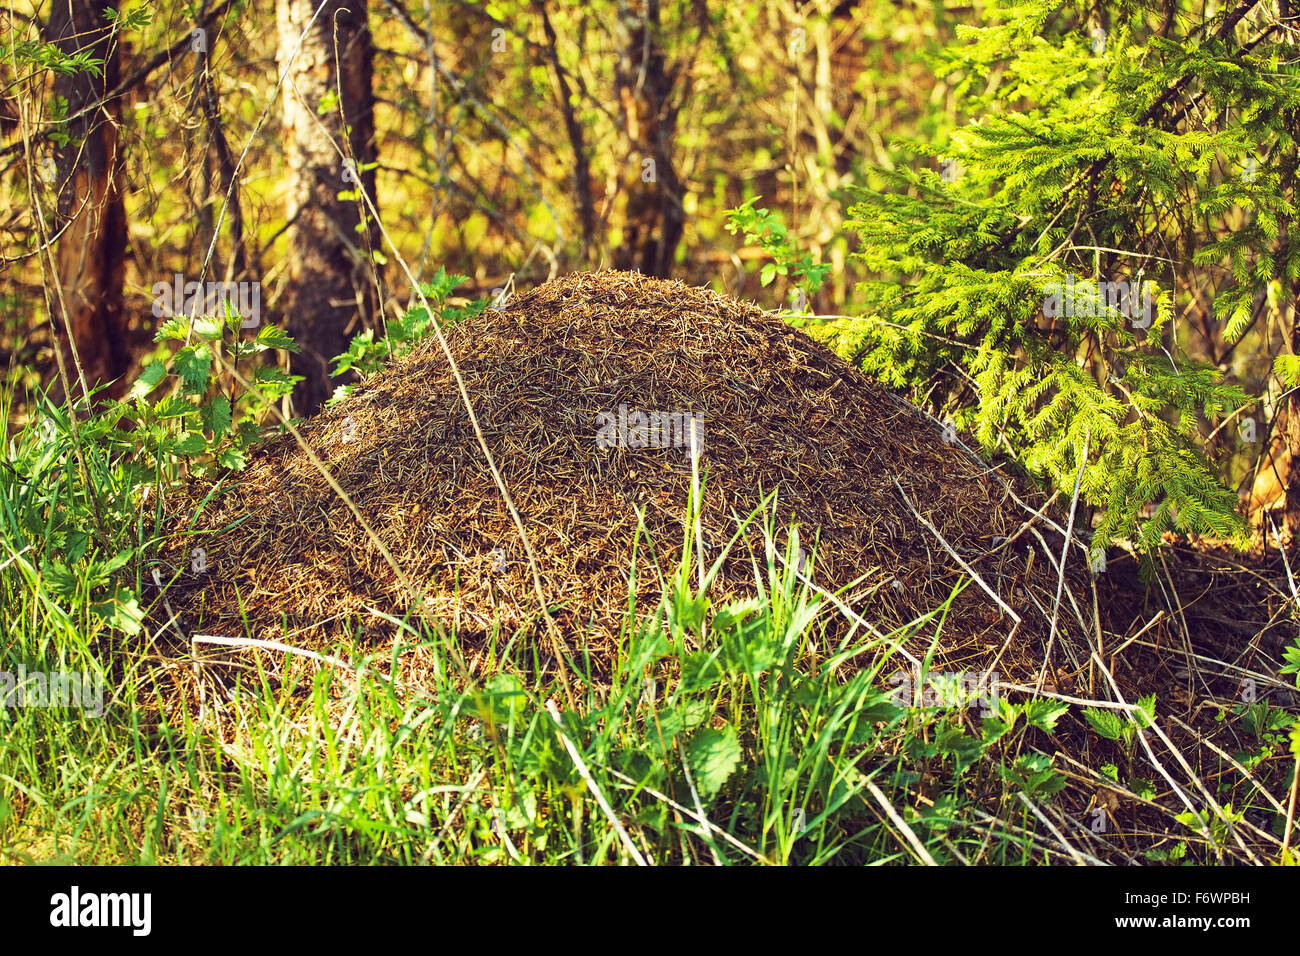 big anthill with colony of ants in summer forest Stock Photo